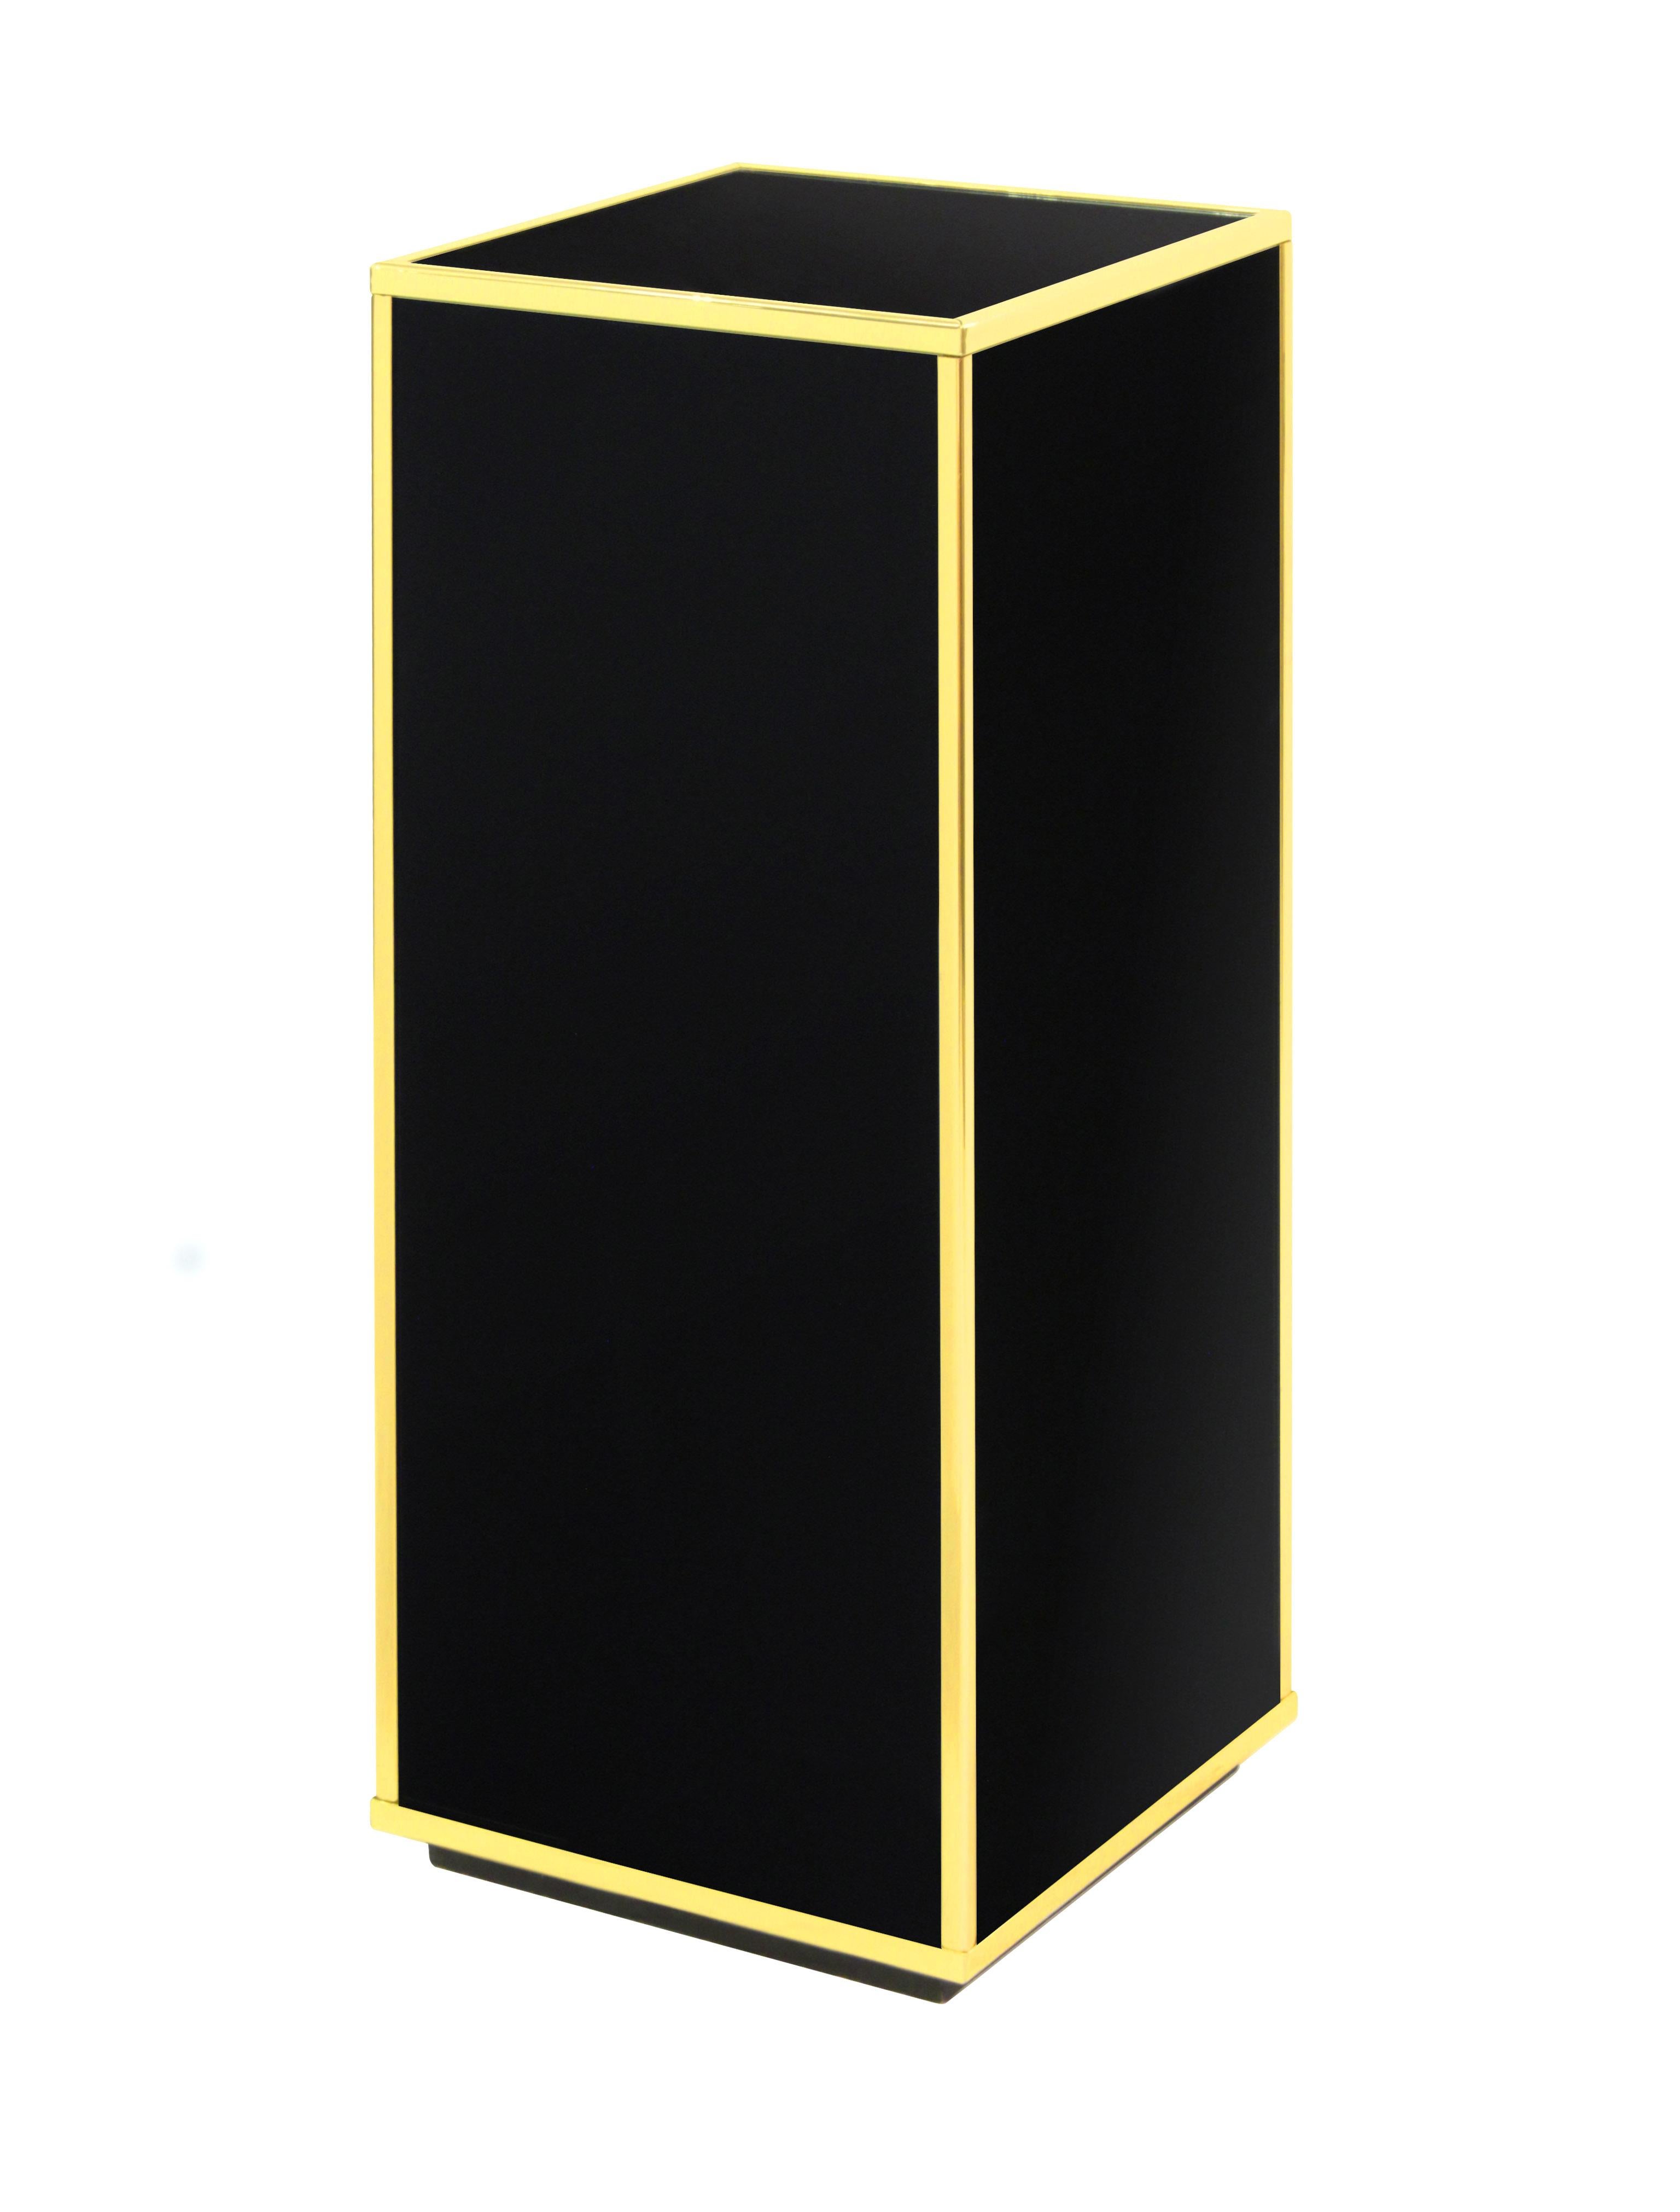 Pedestal in black lucite with brass trim by Saporiti, Milan Italy, 1970's. This pedestal is beautifully made and and the combination of black lucite and brass is very chic.